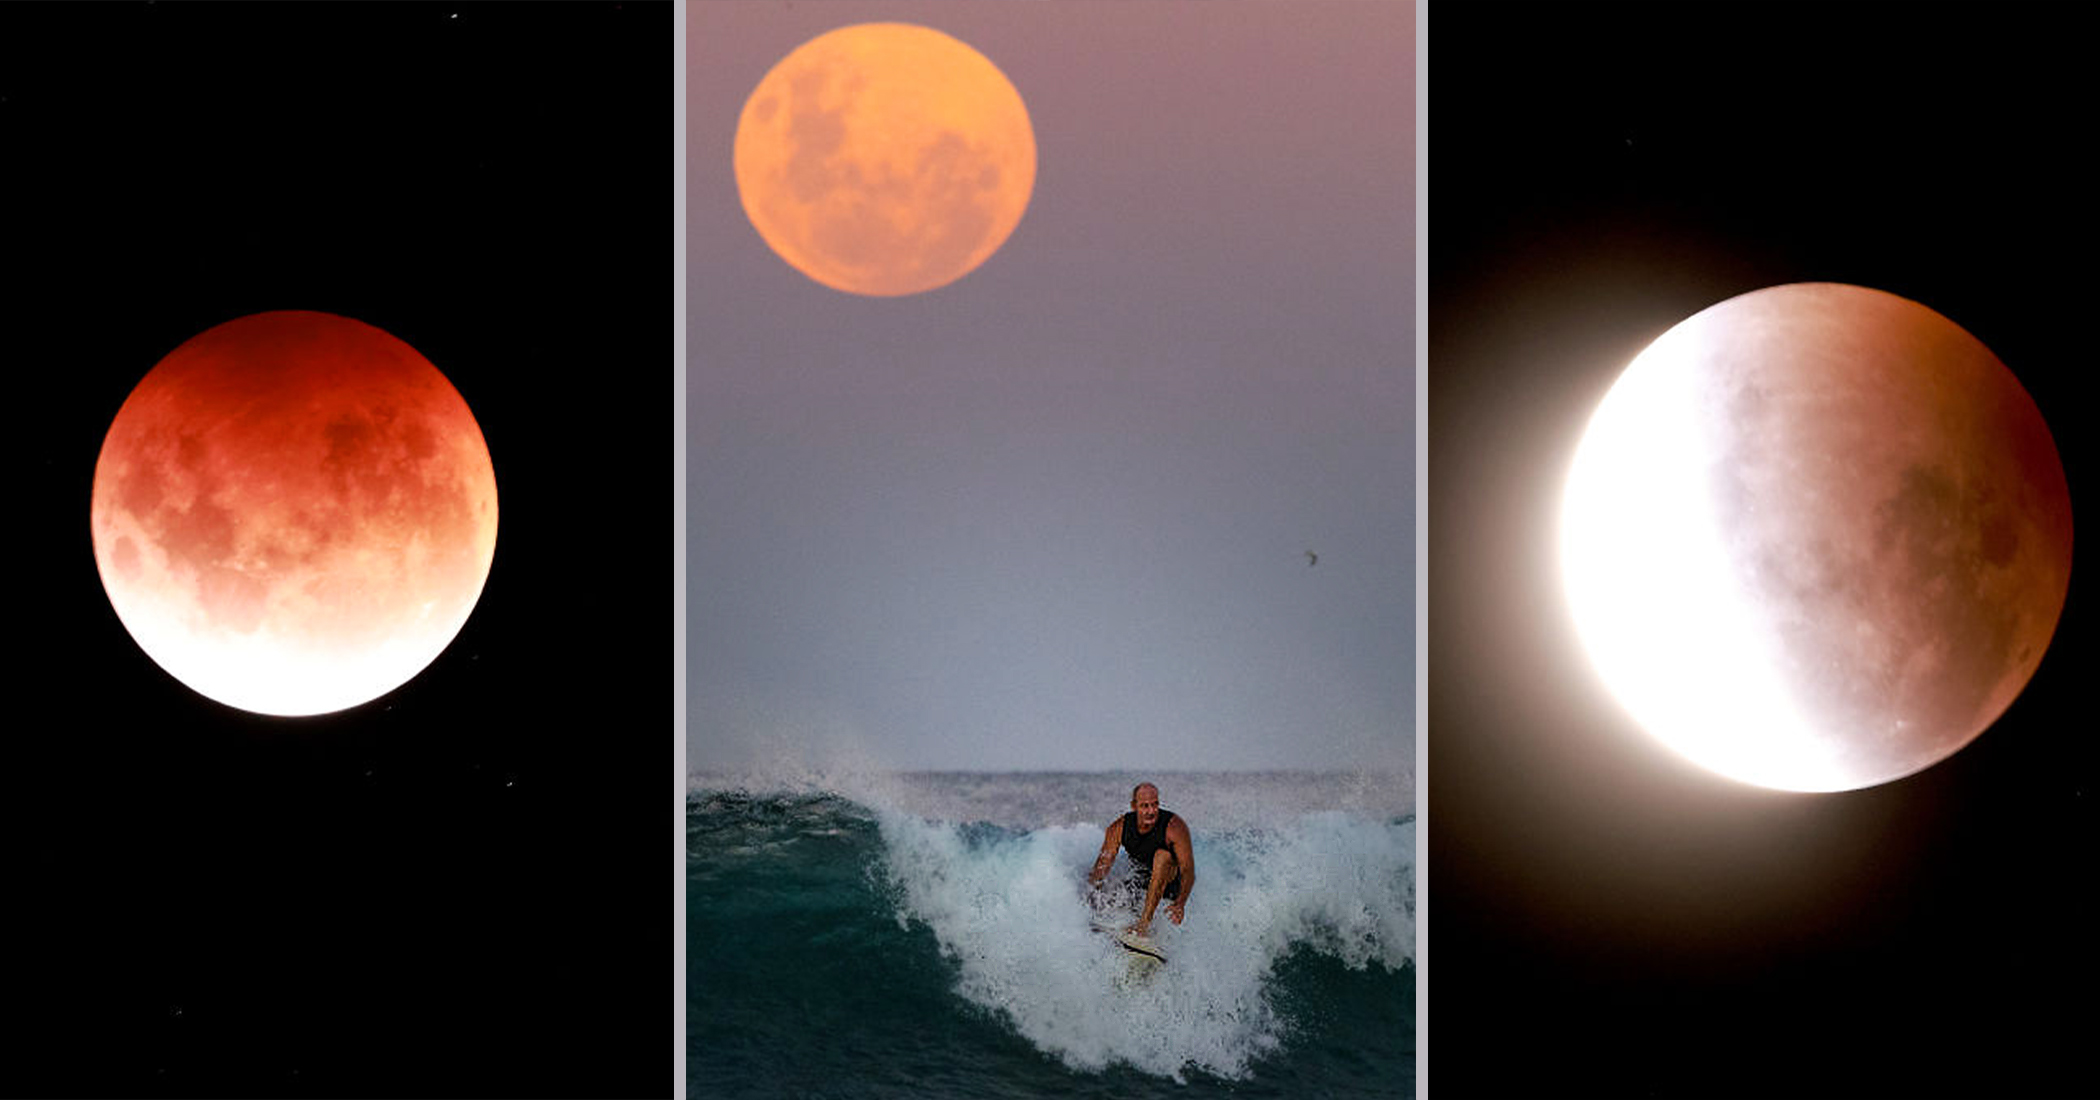 Unreal Photos Show ‘Super Blood Moon’ During Total Lunar Eclipse Across